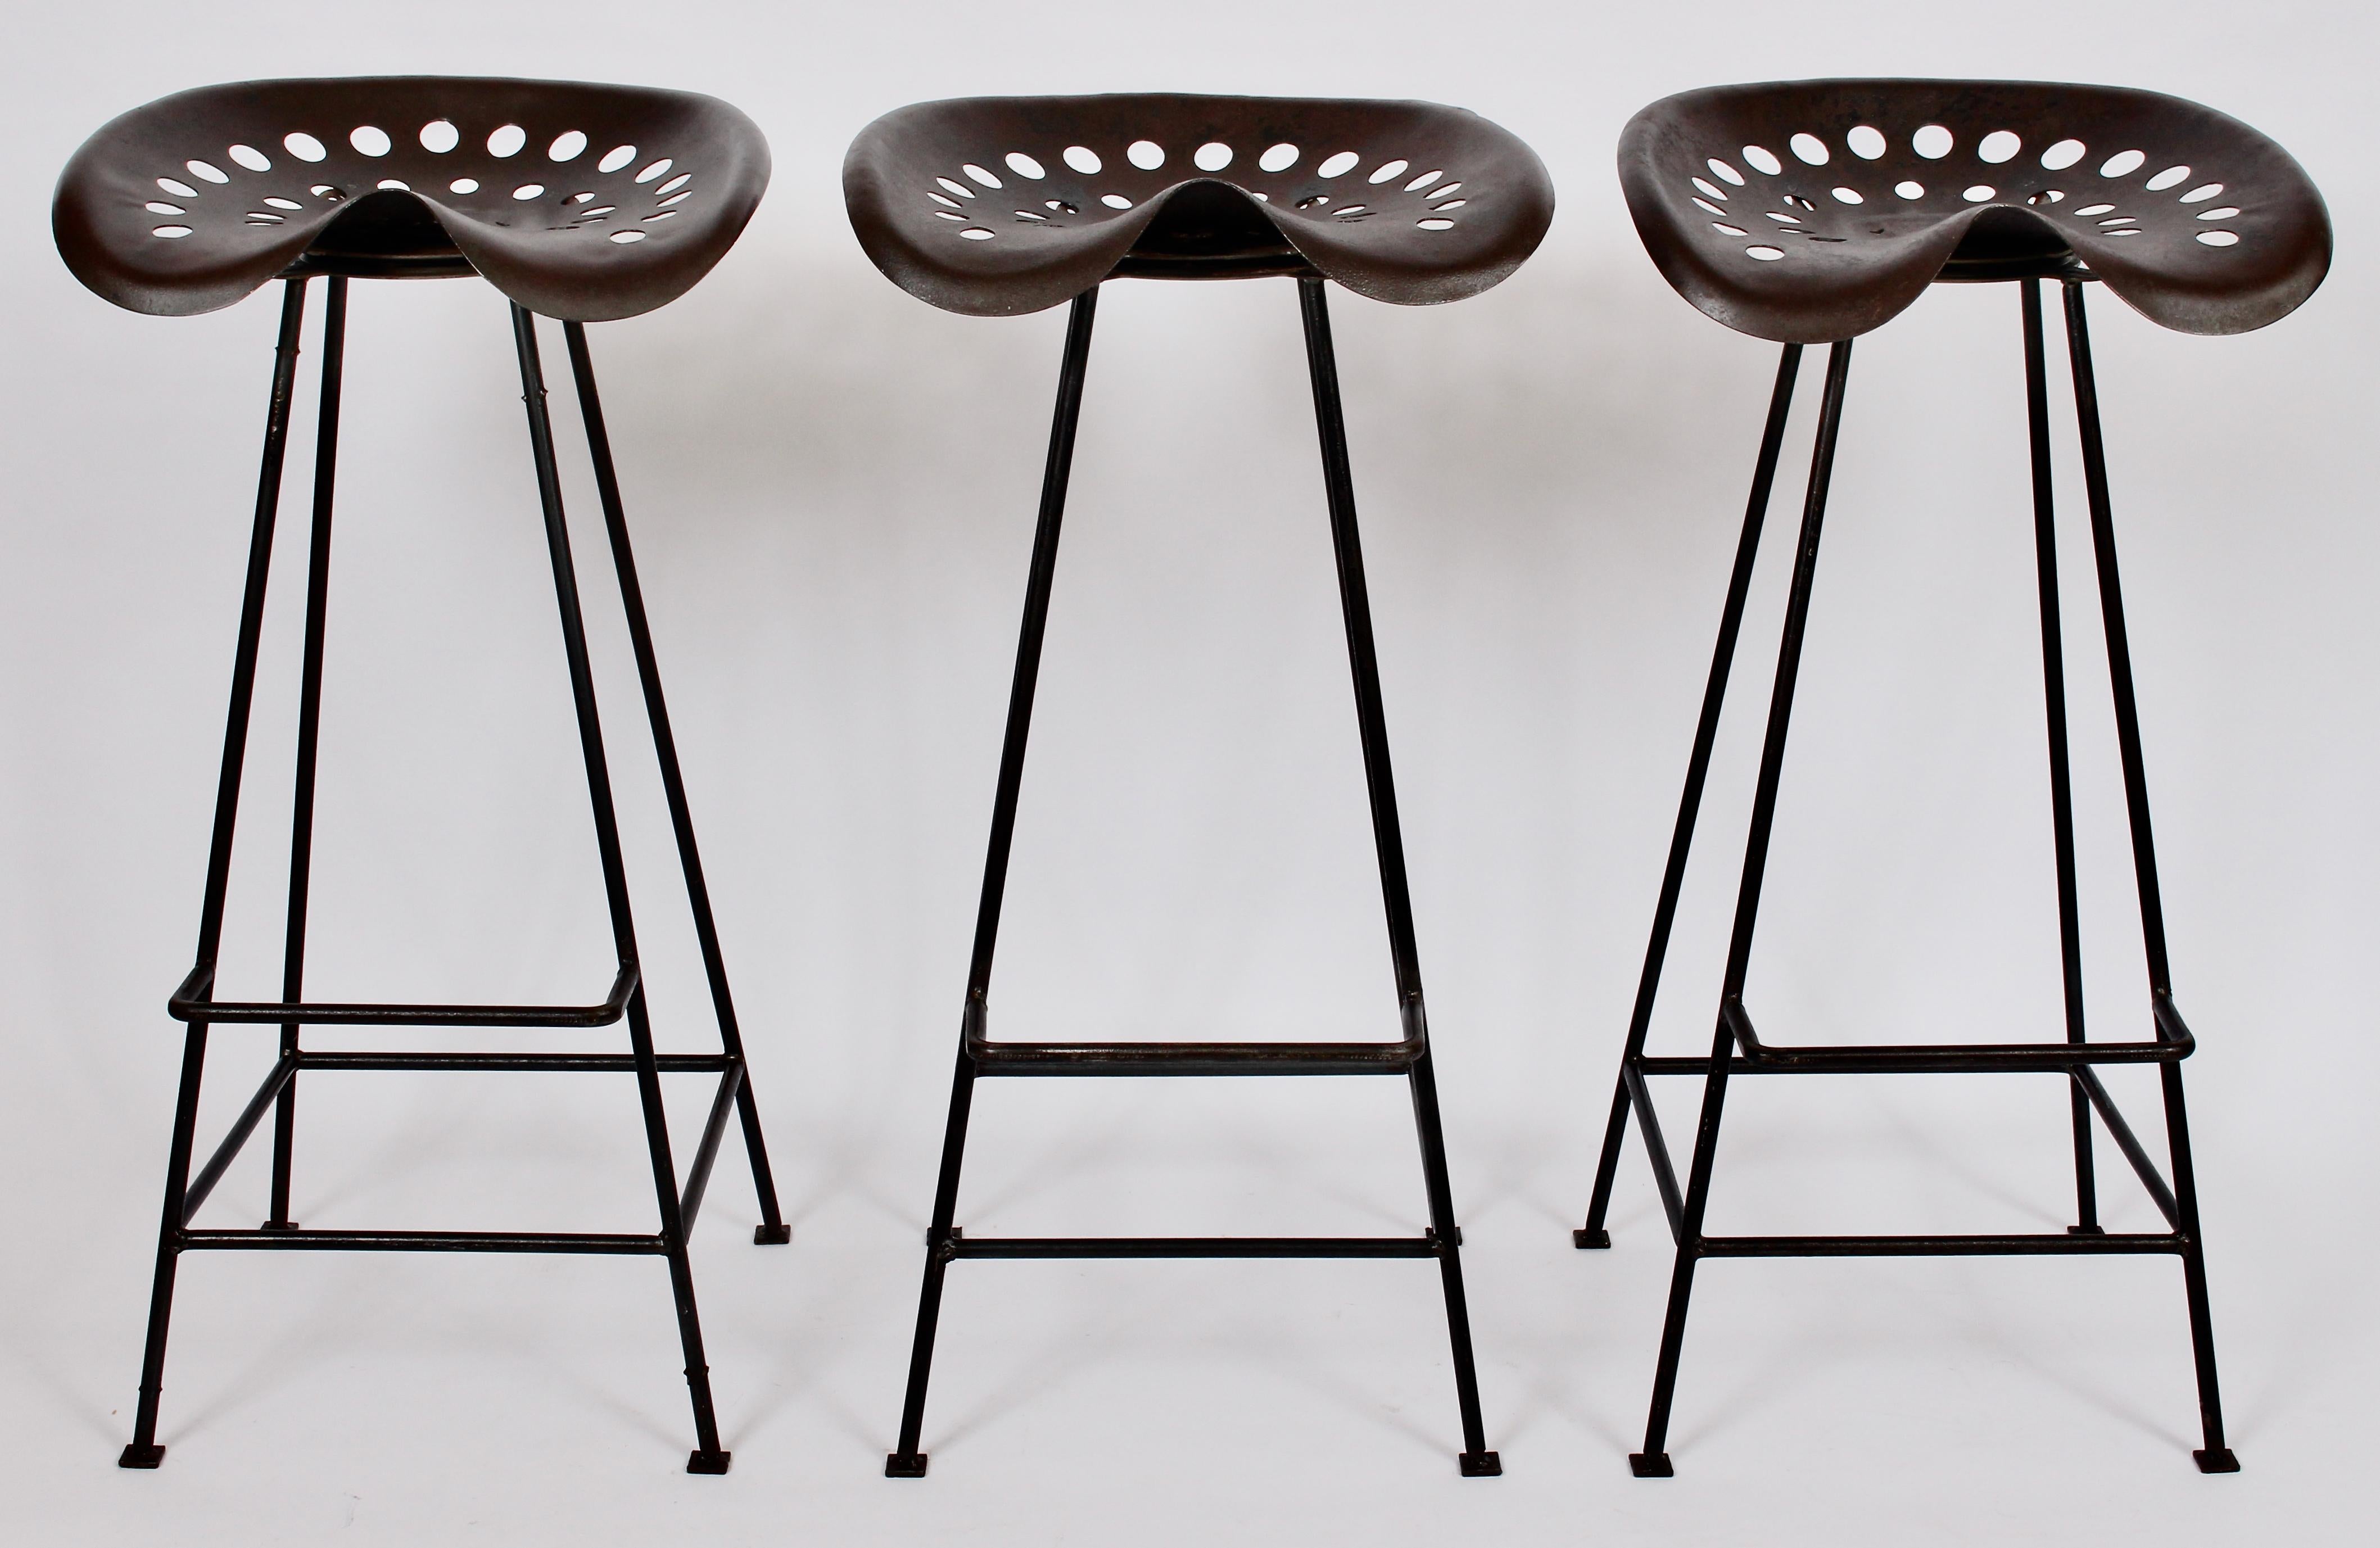 Trio of American Mid Century handcrafted tractor seat bar stools in the style of Benjamin Baldwin. Featuring a sturdy, open Iron framework, footrests with wide perforated patinated and sealed swivel seats (17